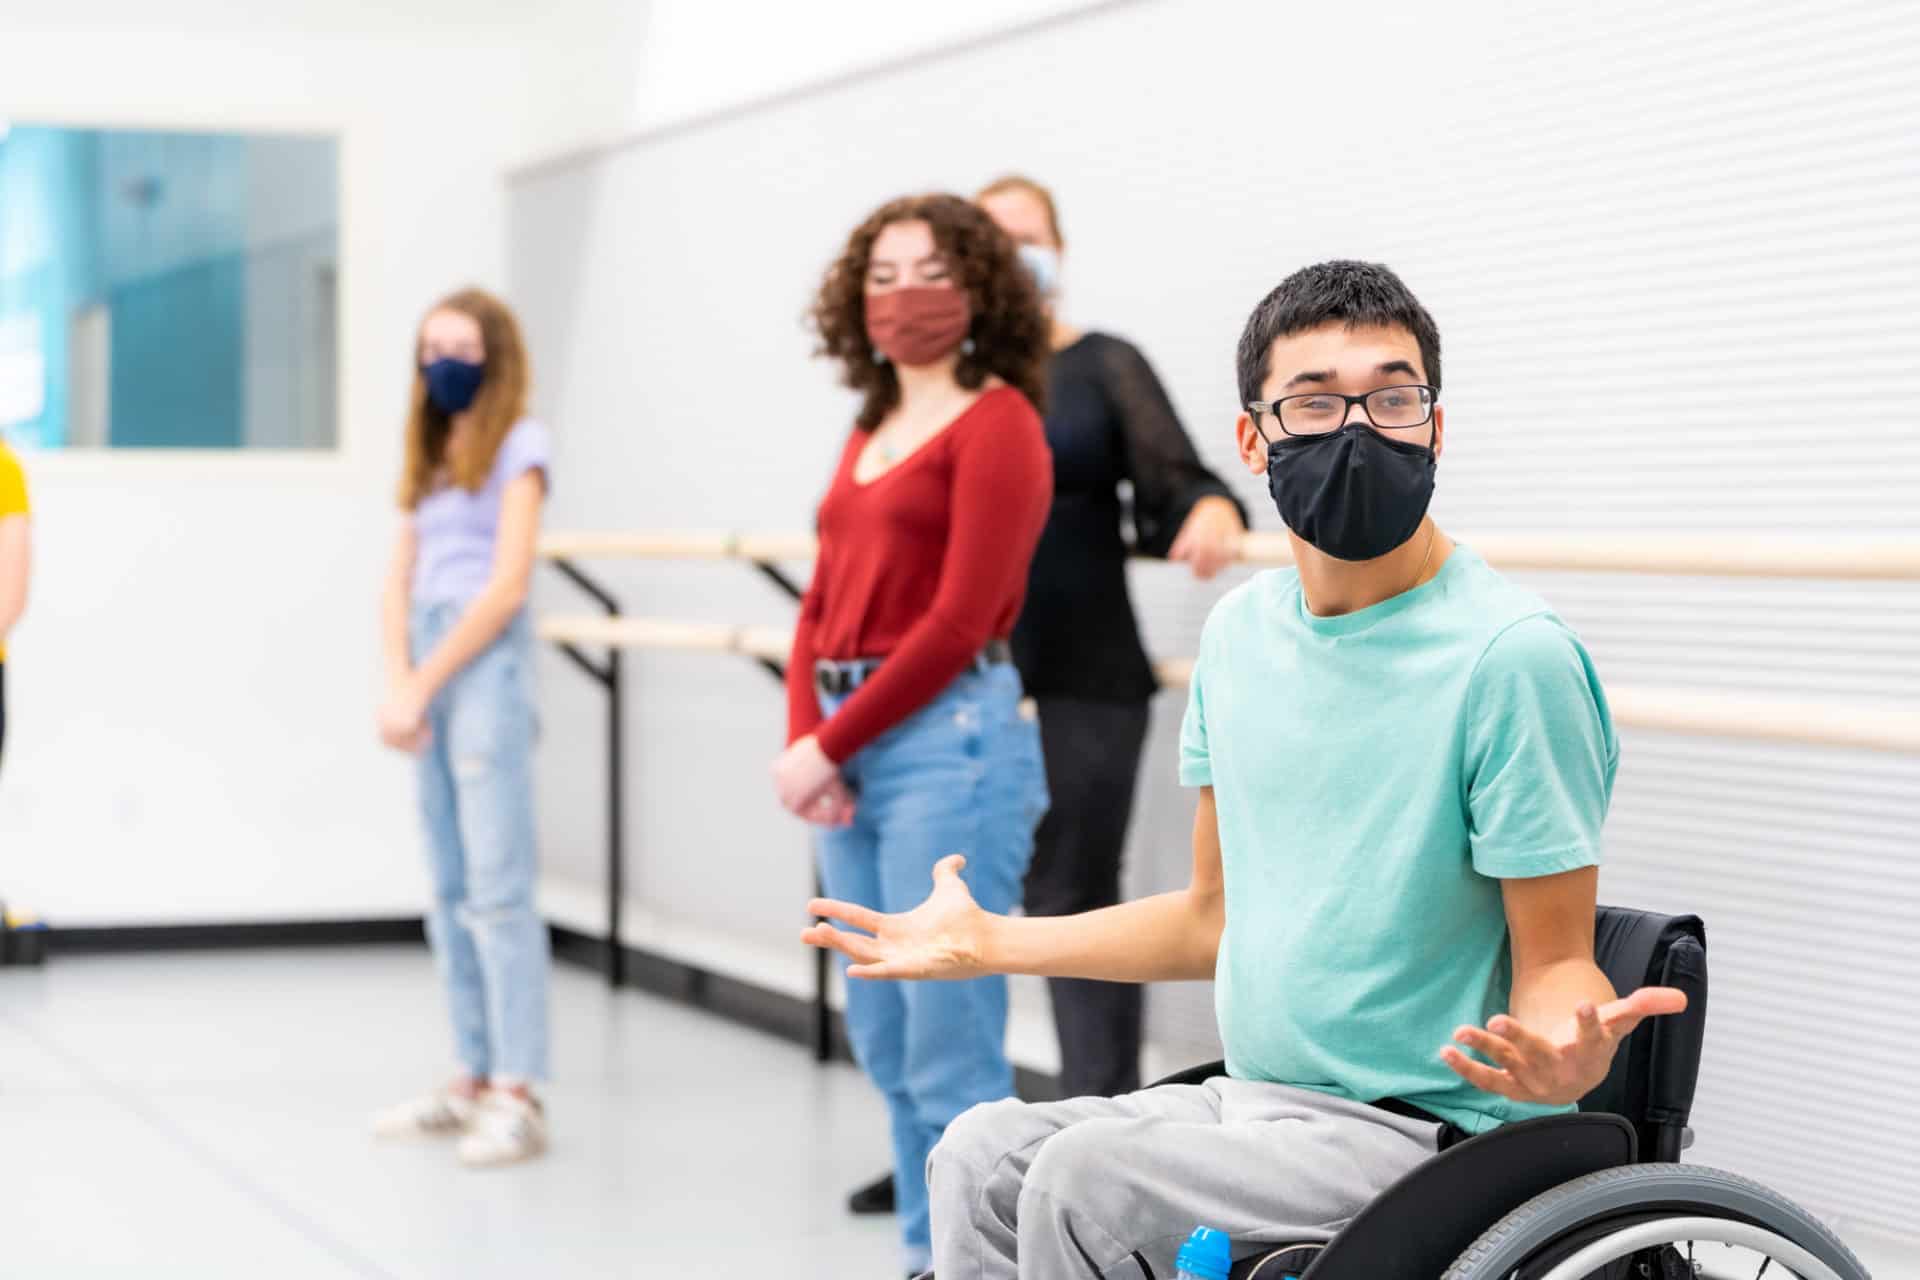 Students participate in a Conservatory summer class at The Hanover Theatre. The students are wearing masks and are located inside a studio. The student closest to the camera is using a wheelchair and is making a gesture with their arms. The other students are standing near the wall and clasping their hands together.